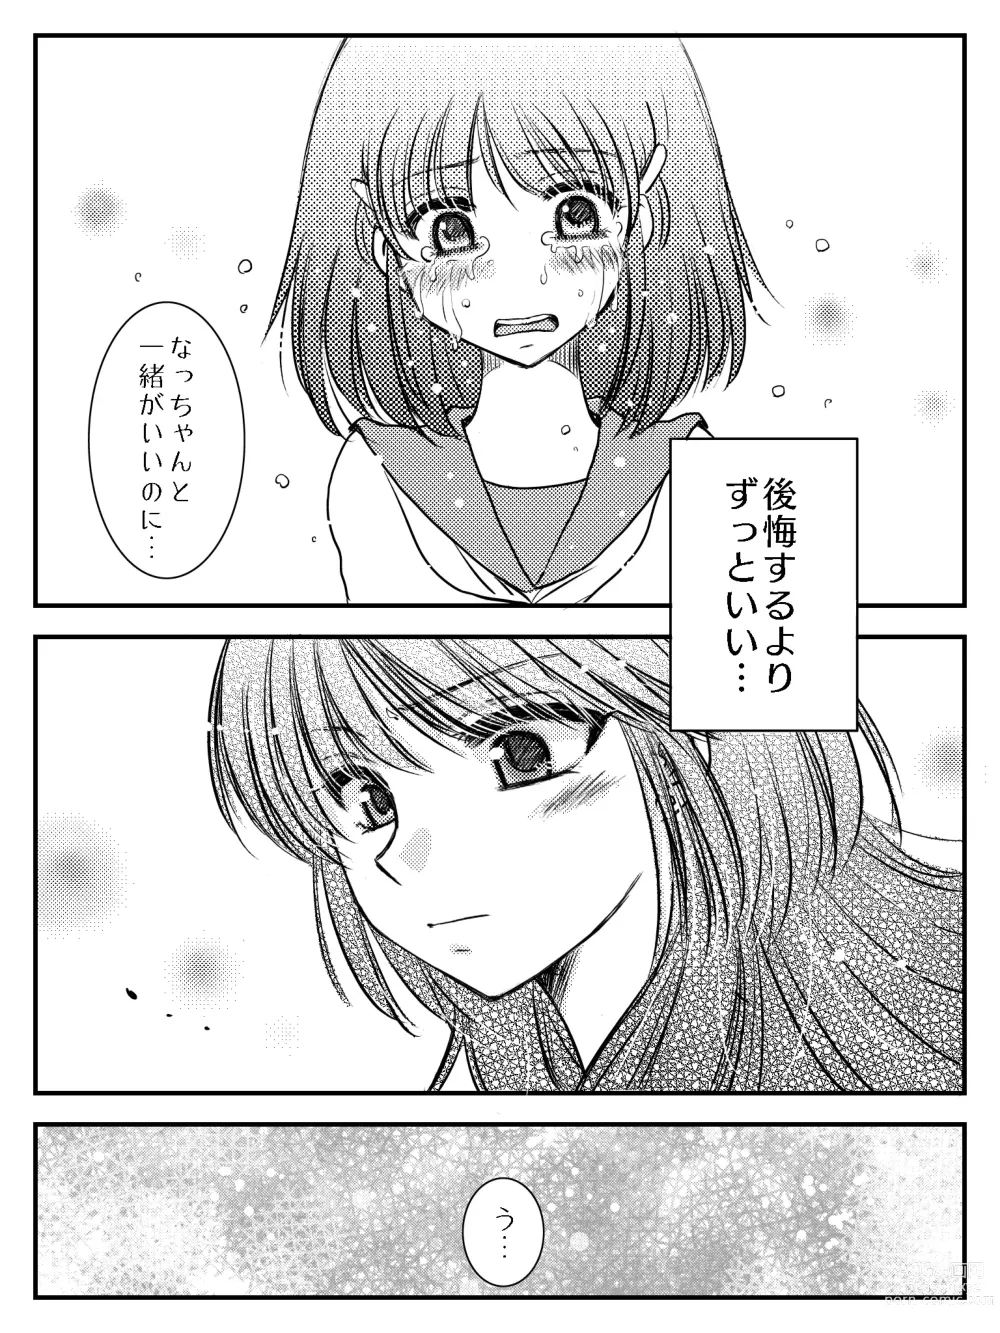 Page 46 of doujinshi LADIES NAVIGATION Episode 7 BE THE ONE